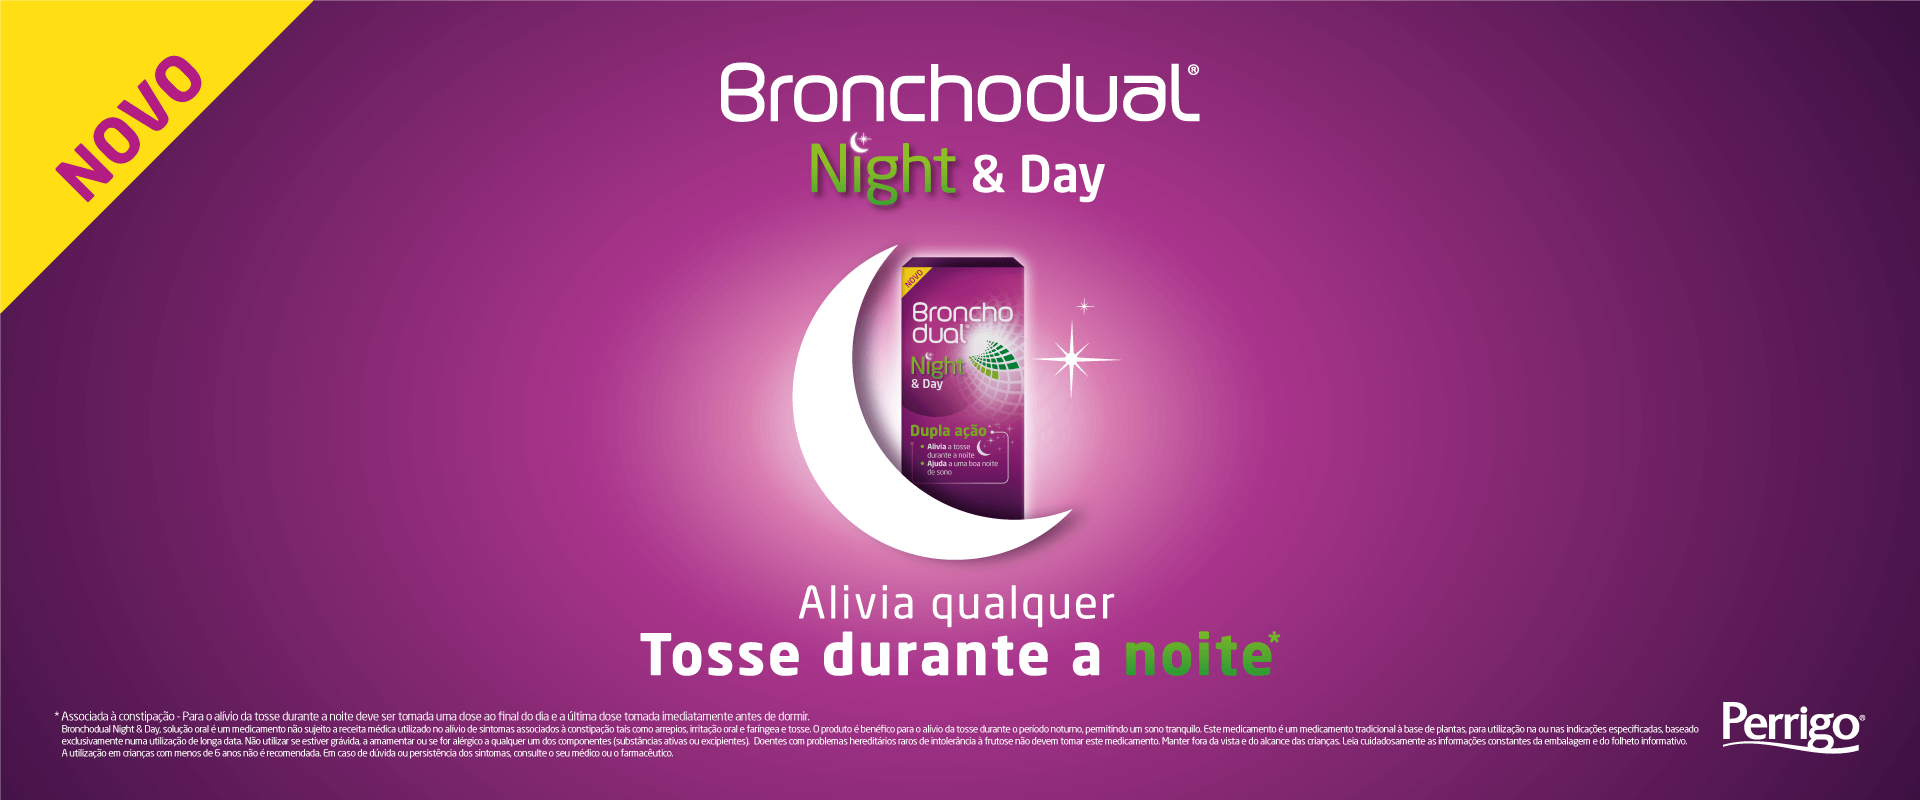 bronchodual-nigth-and-day-banner